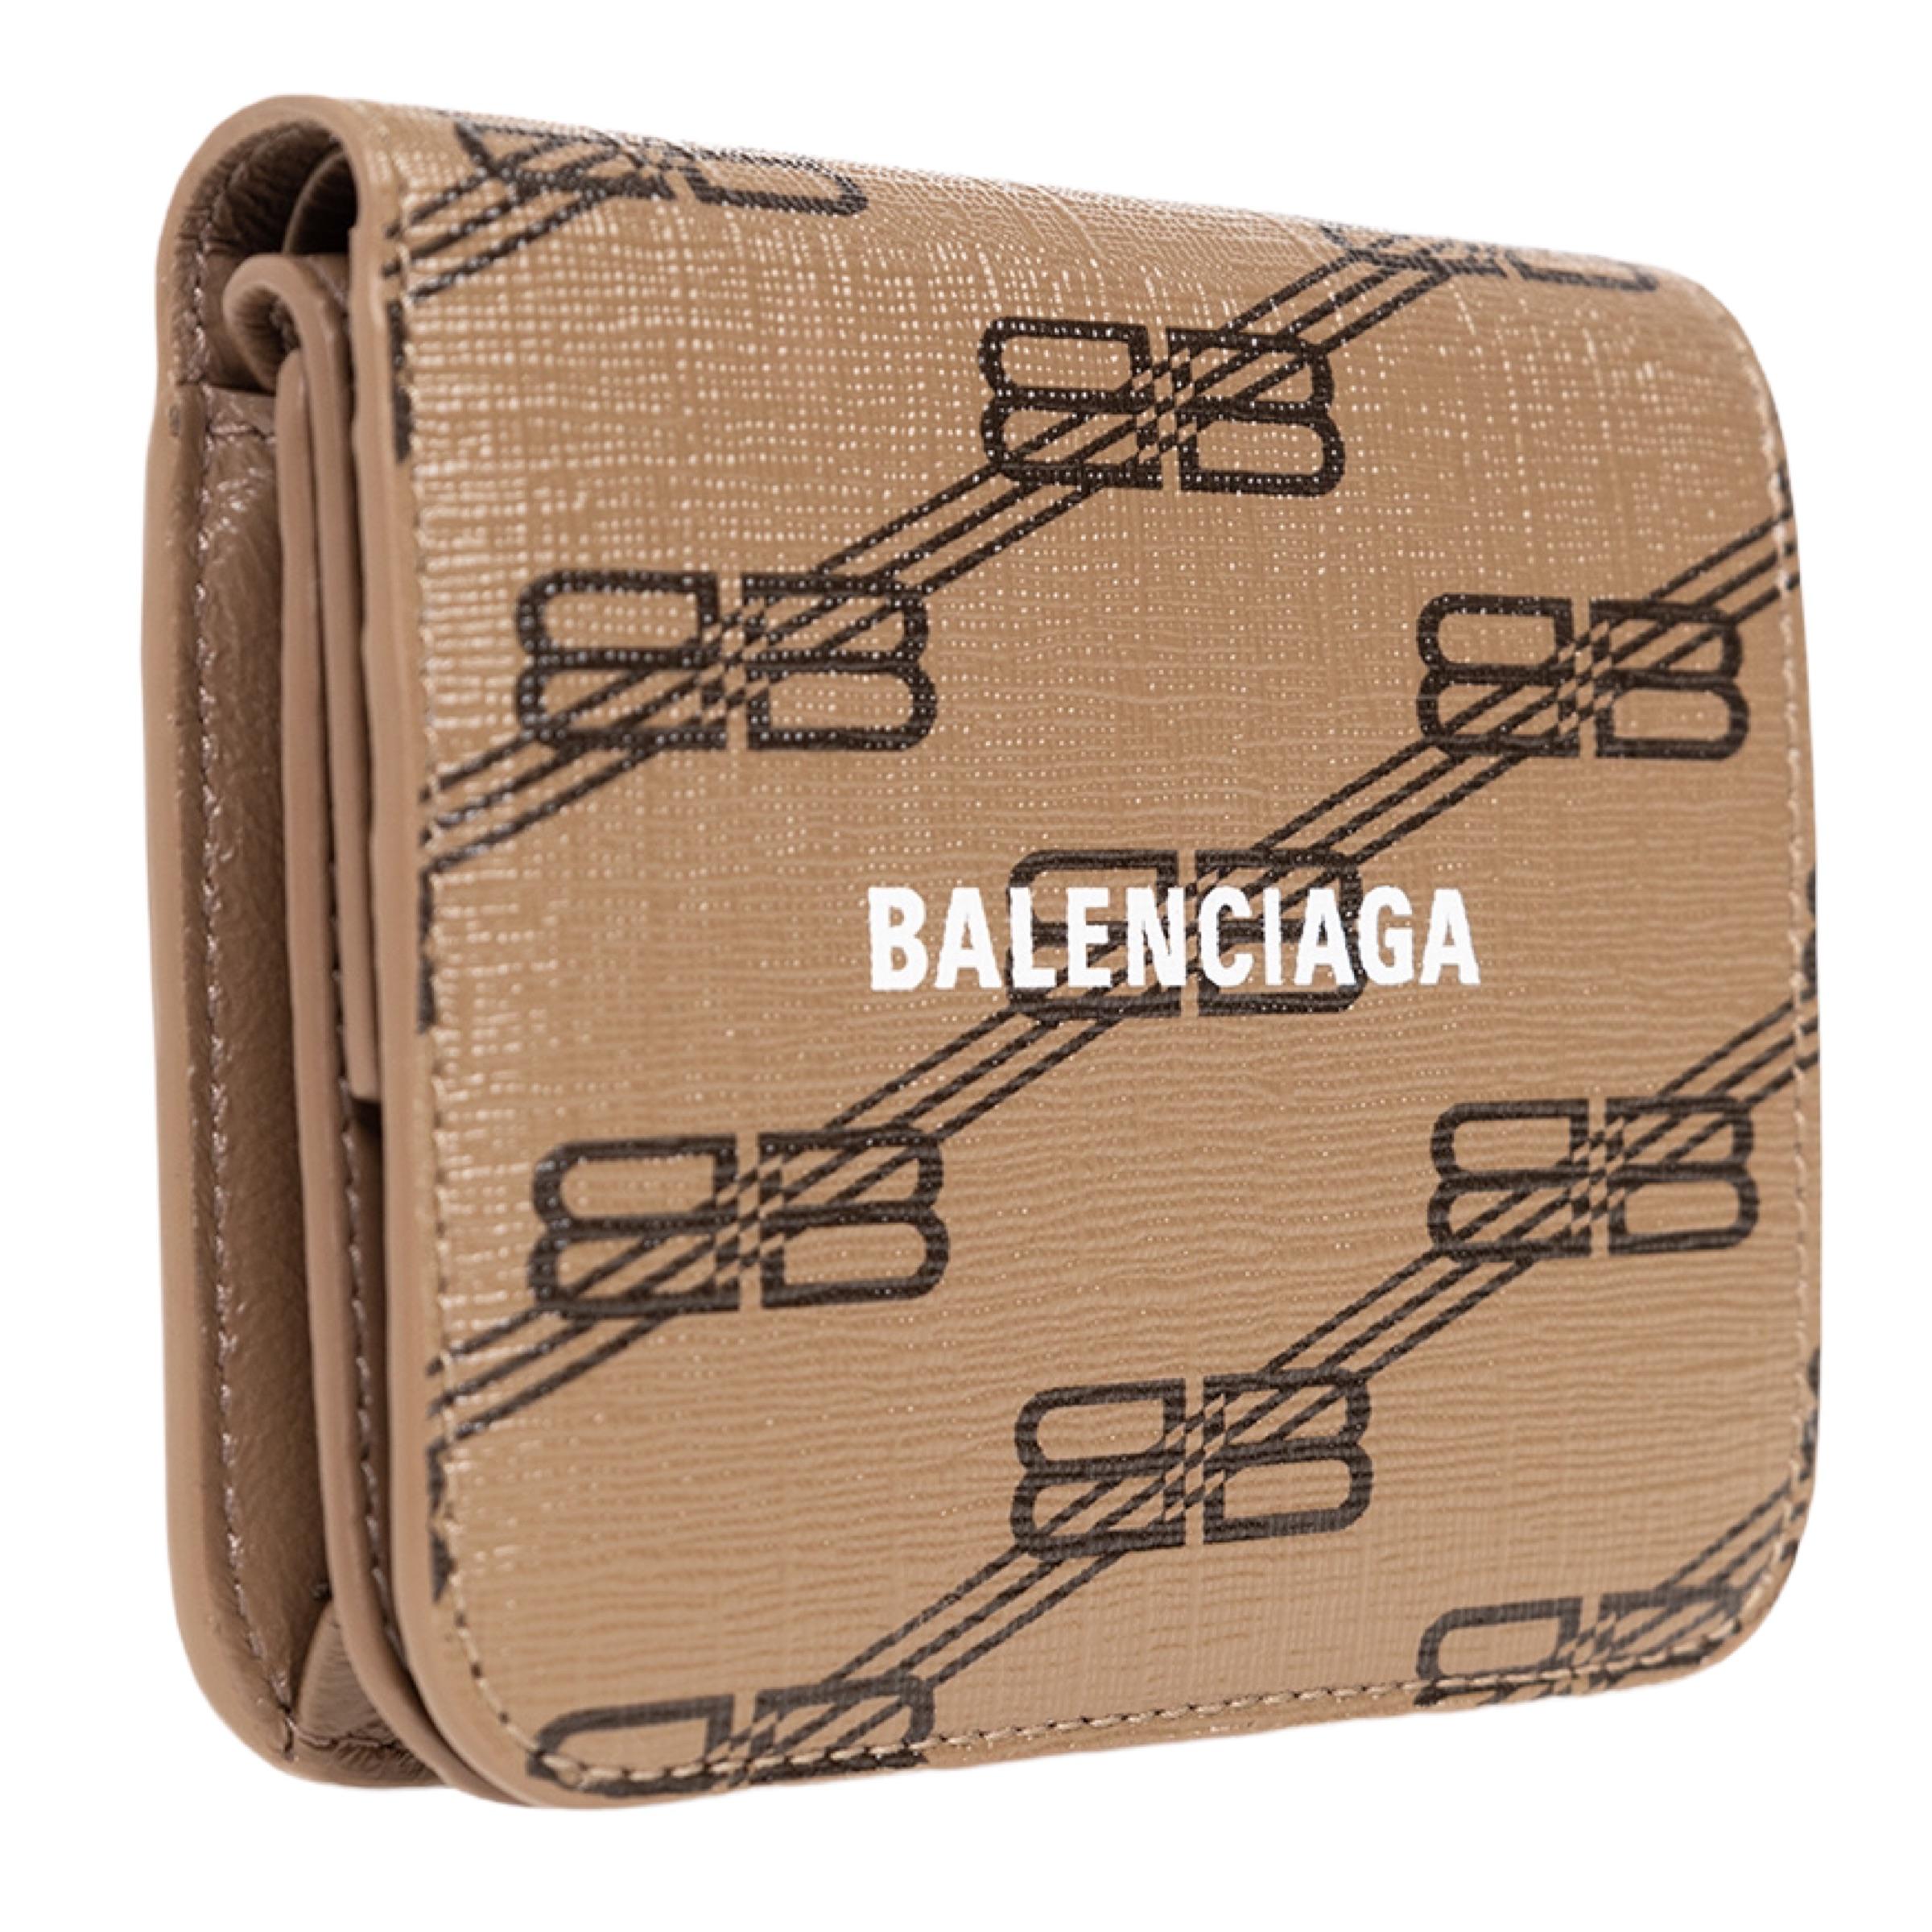 New Balenciaga Brown Monogram BB Logo Print Leather Bifold Wallet

Authenticity Guaranteed

DETAILS
Brand: Balenciaga
Condition: Brand new
Gender: Unisex
Category: Wallet
Color: Brown
Material: Coated canvas
Monogram BB pattern
Front logo